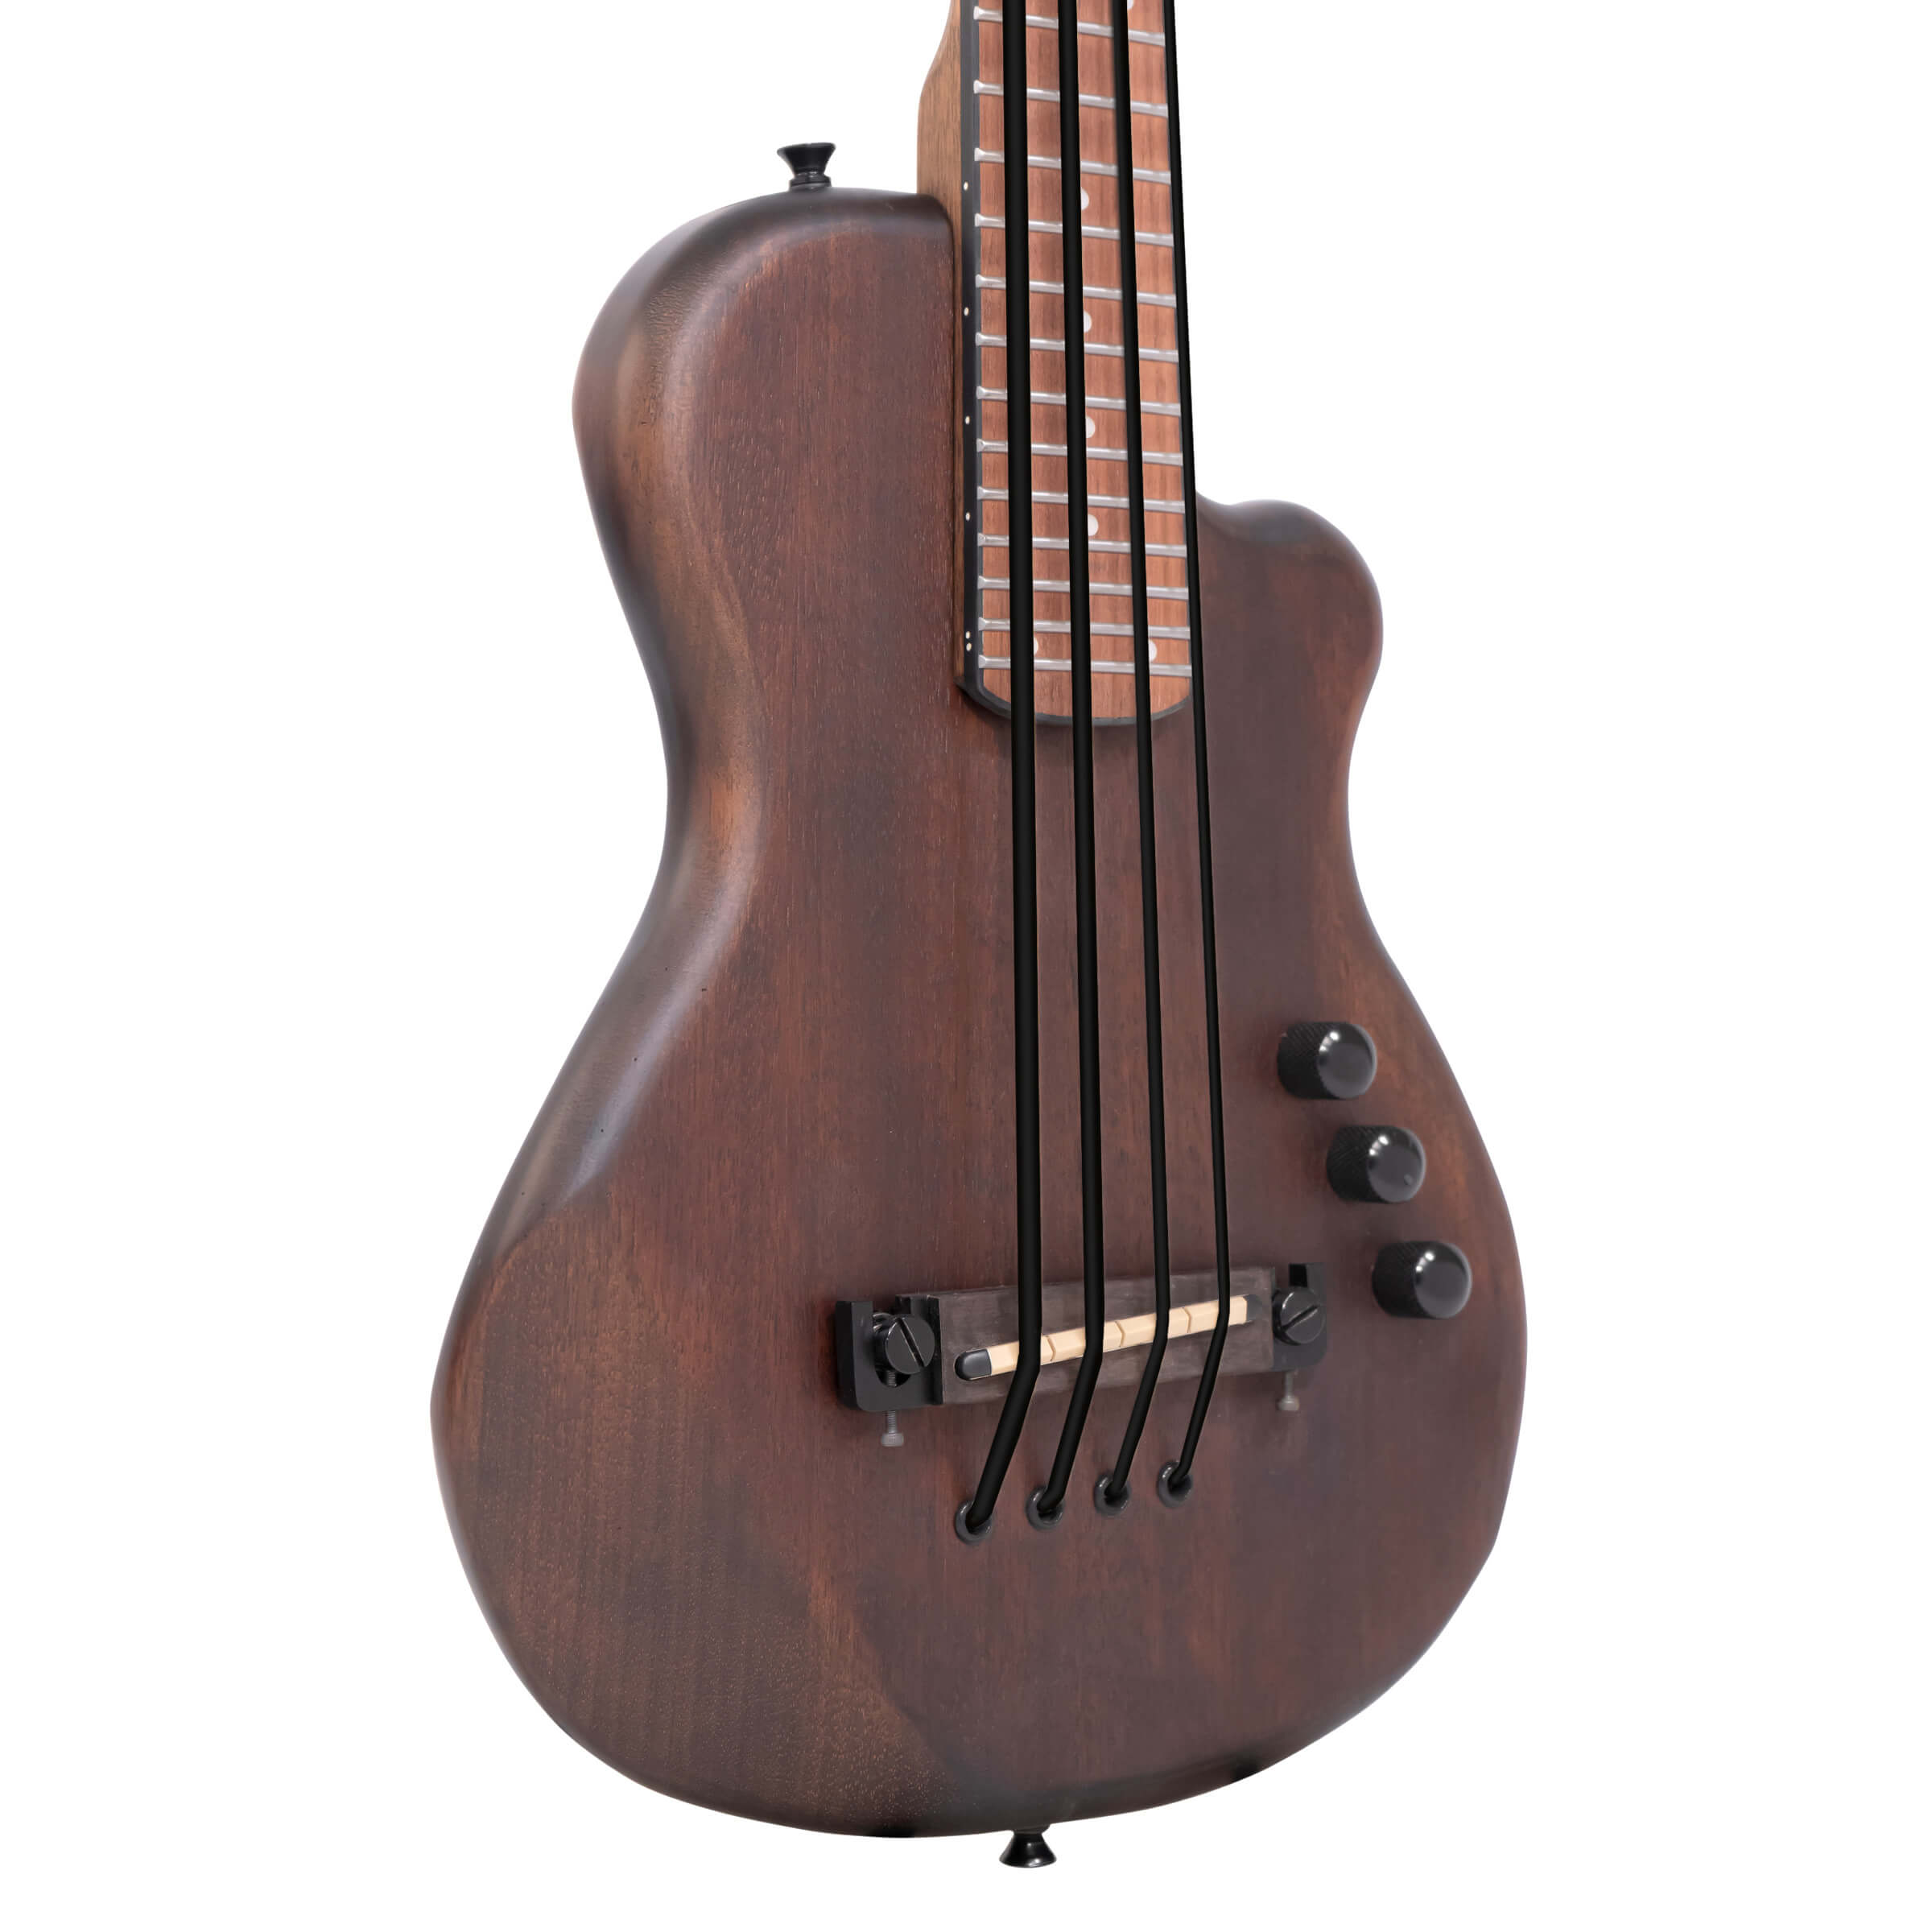 ME-Bass: 23-Inch Scale Electric MicroBass | Gold Tone Folk Instruments